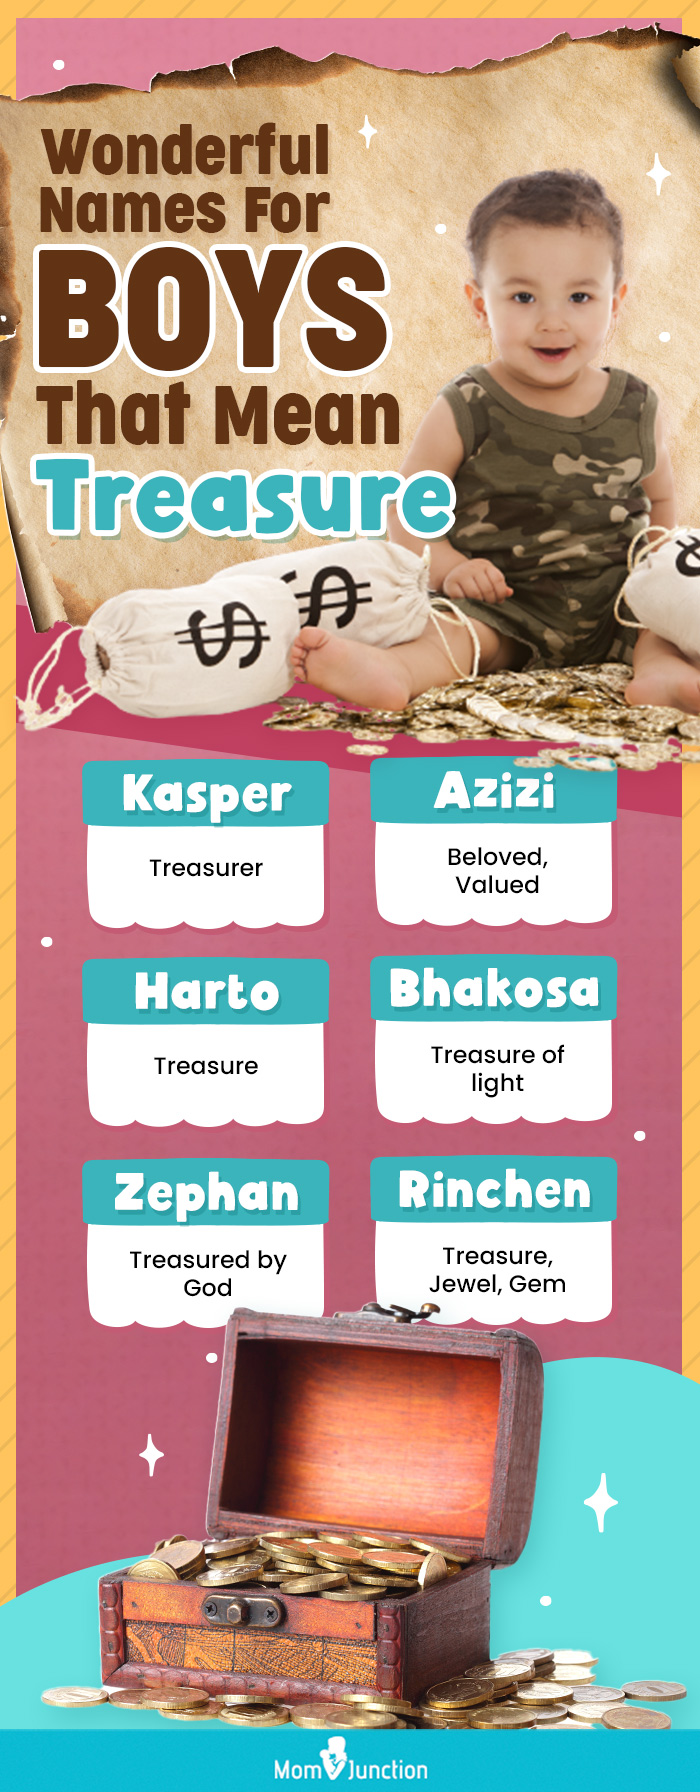 wonderful names for boys that mean treasure (infographic)